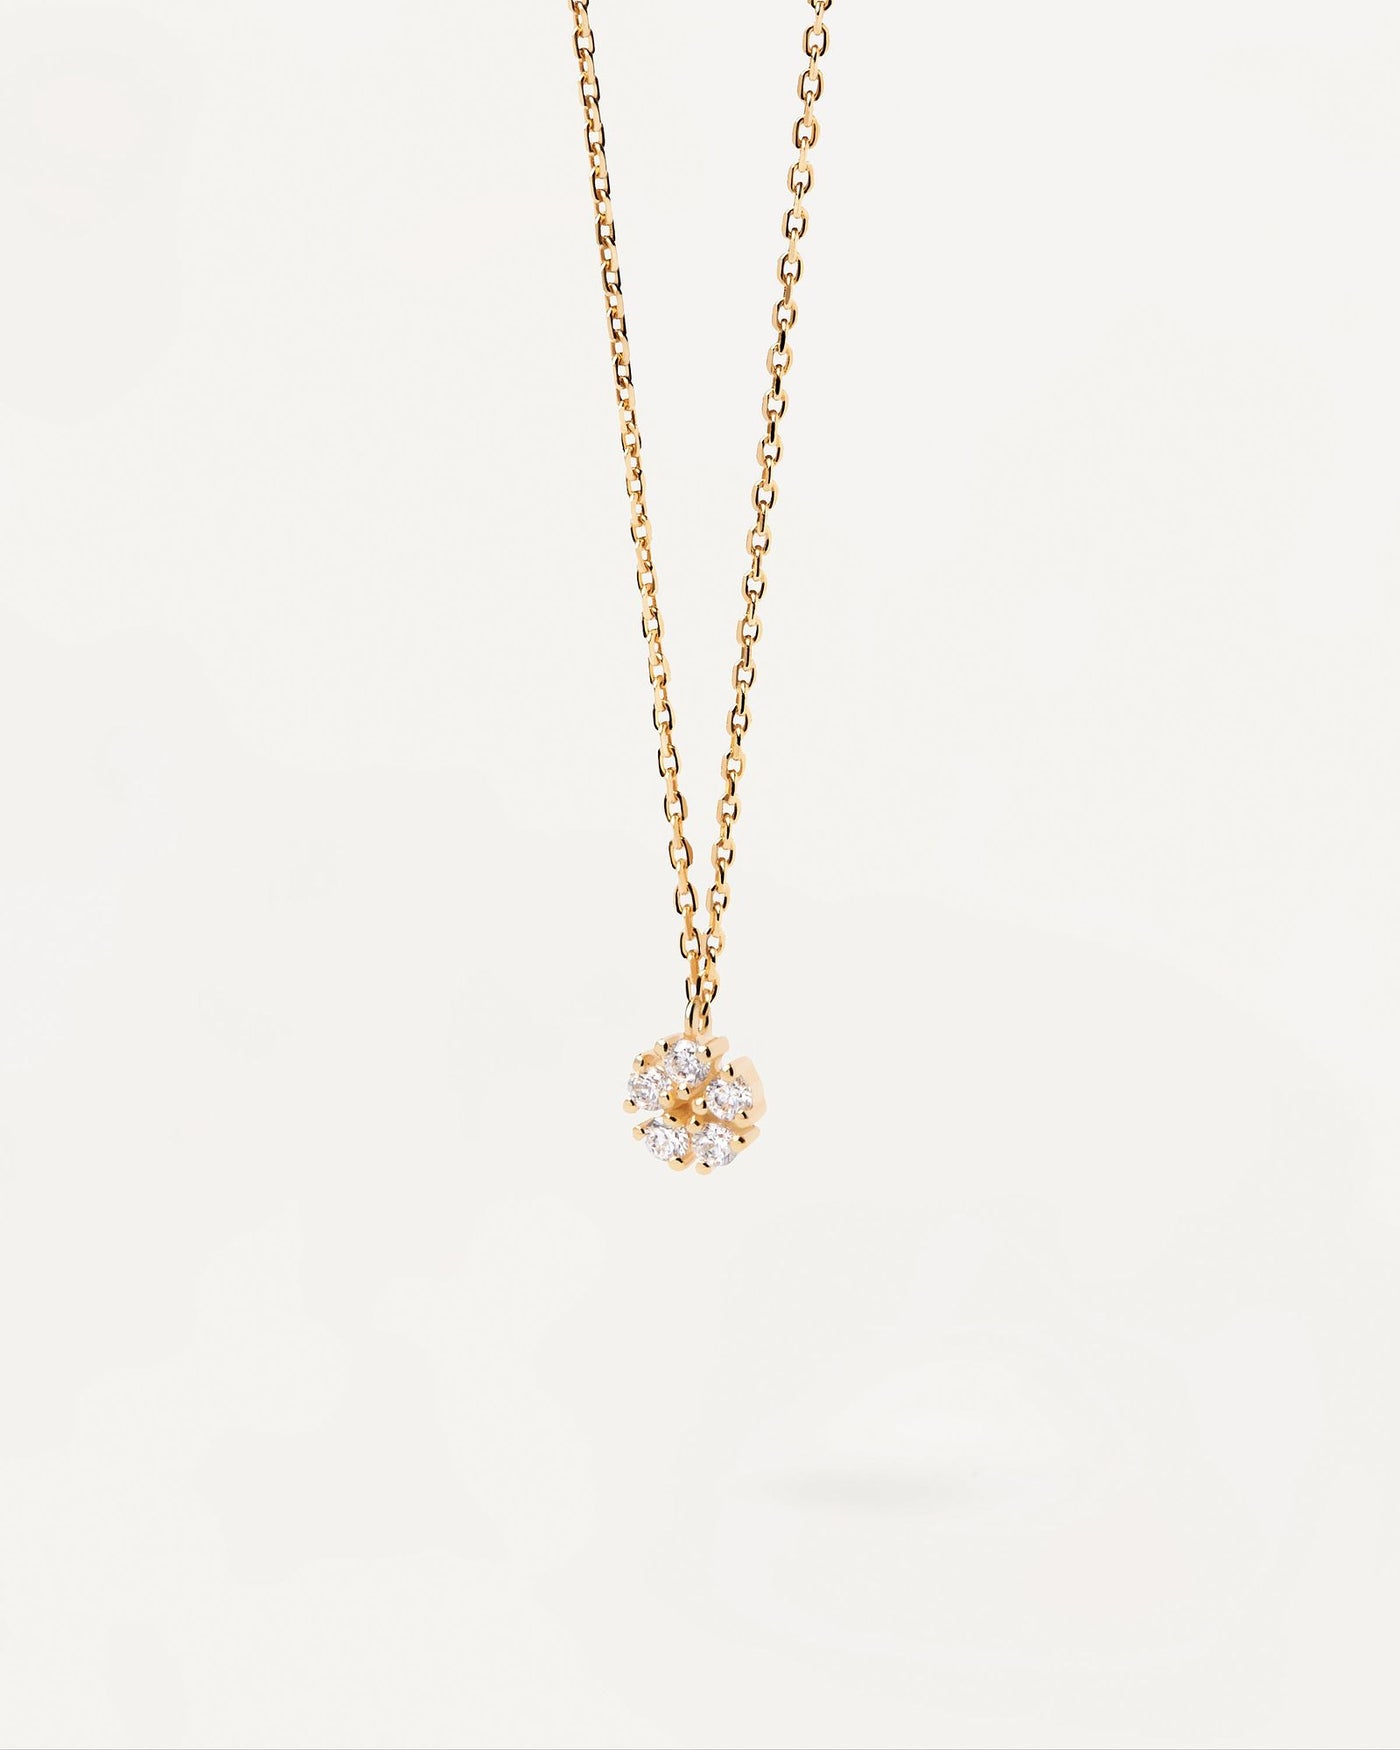 2024 Selection | Daisy Necklace. Gold-plated silver necklace with flower zirconia pendant. Get the latest arrival from PDPAOLA. Place your order safely and get this Best Seller. Free Shipping.